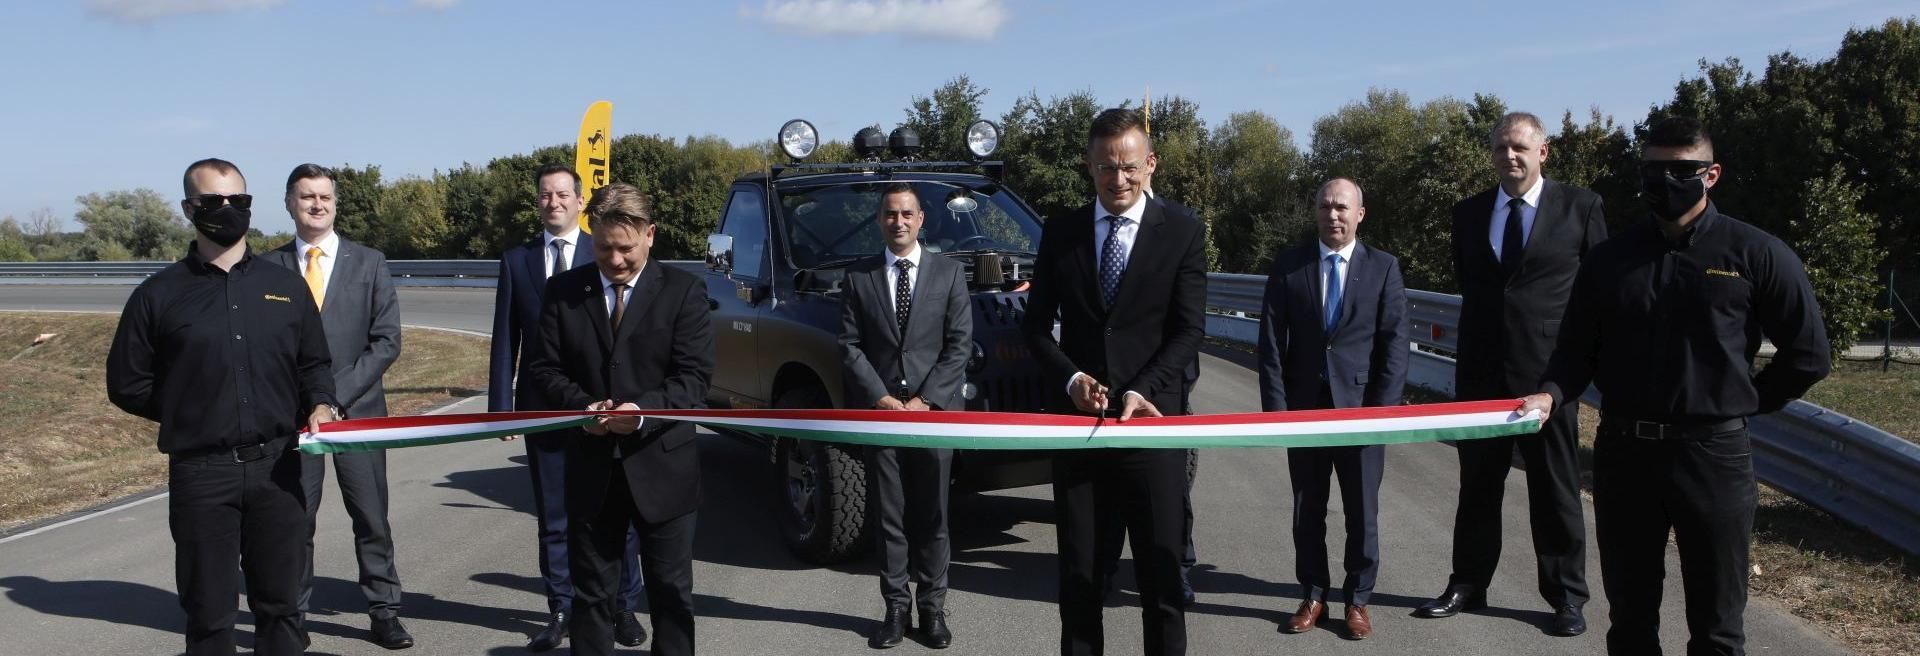 Continental handed over its redesigned test track in Veszprém - VIDEO REPORT